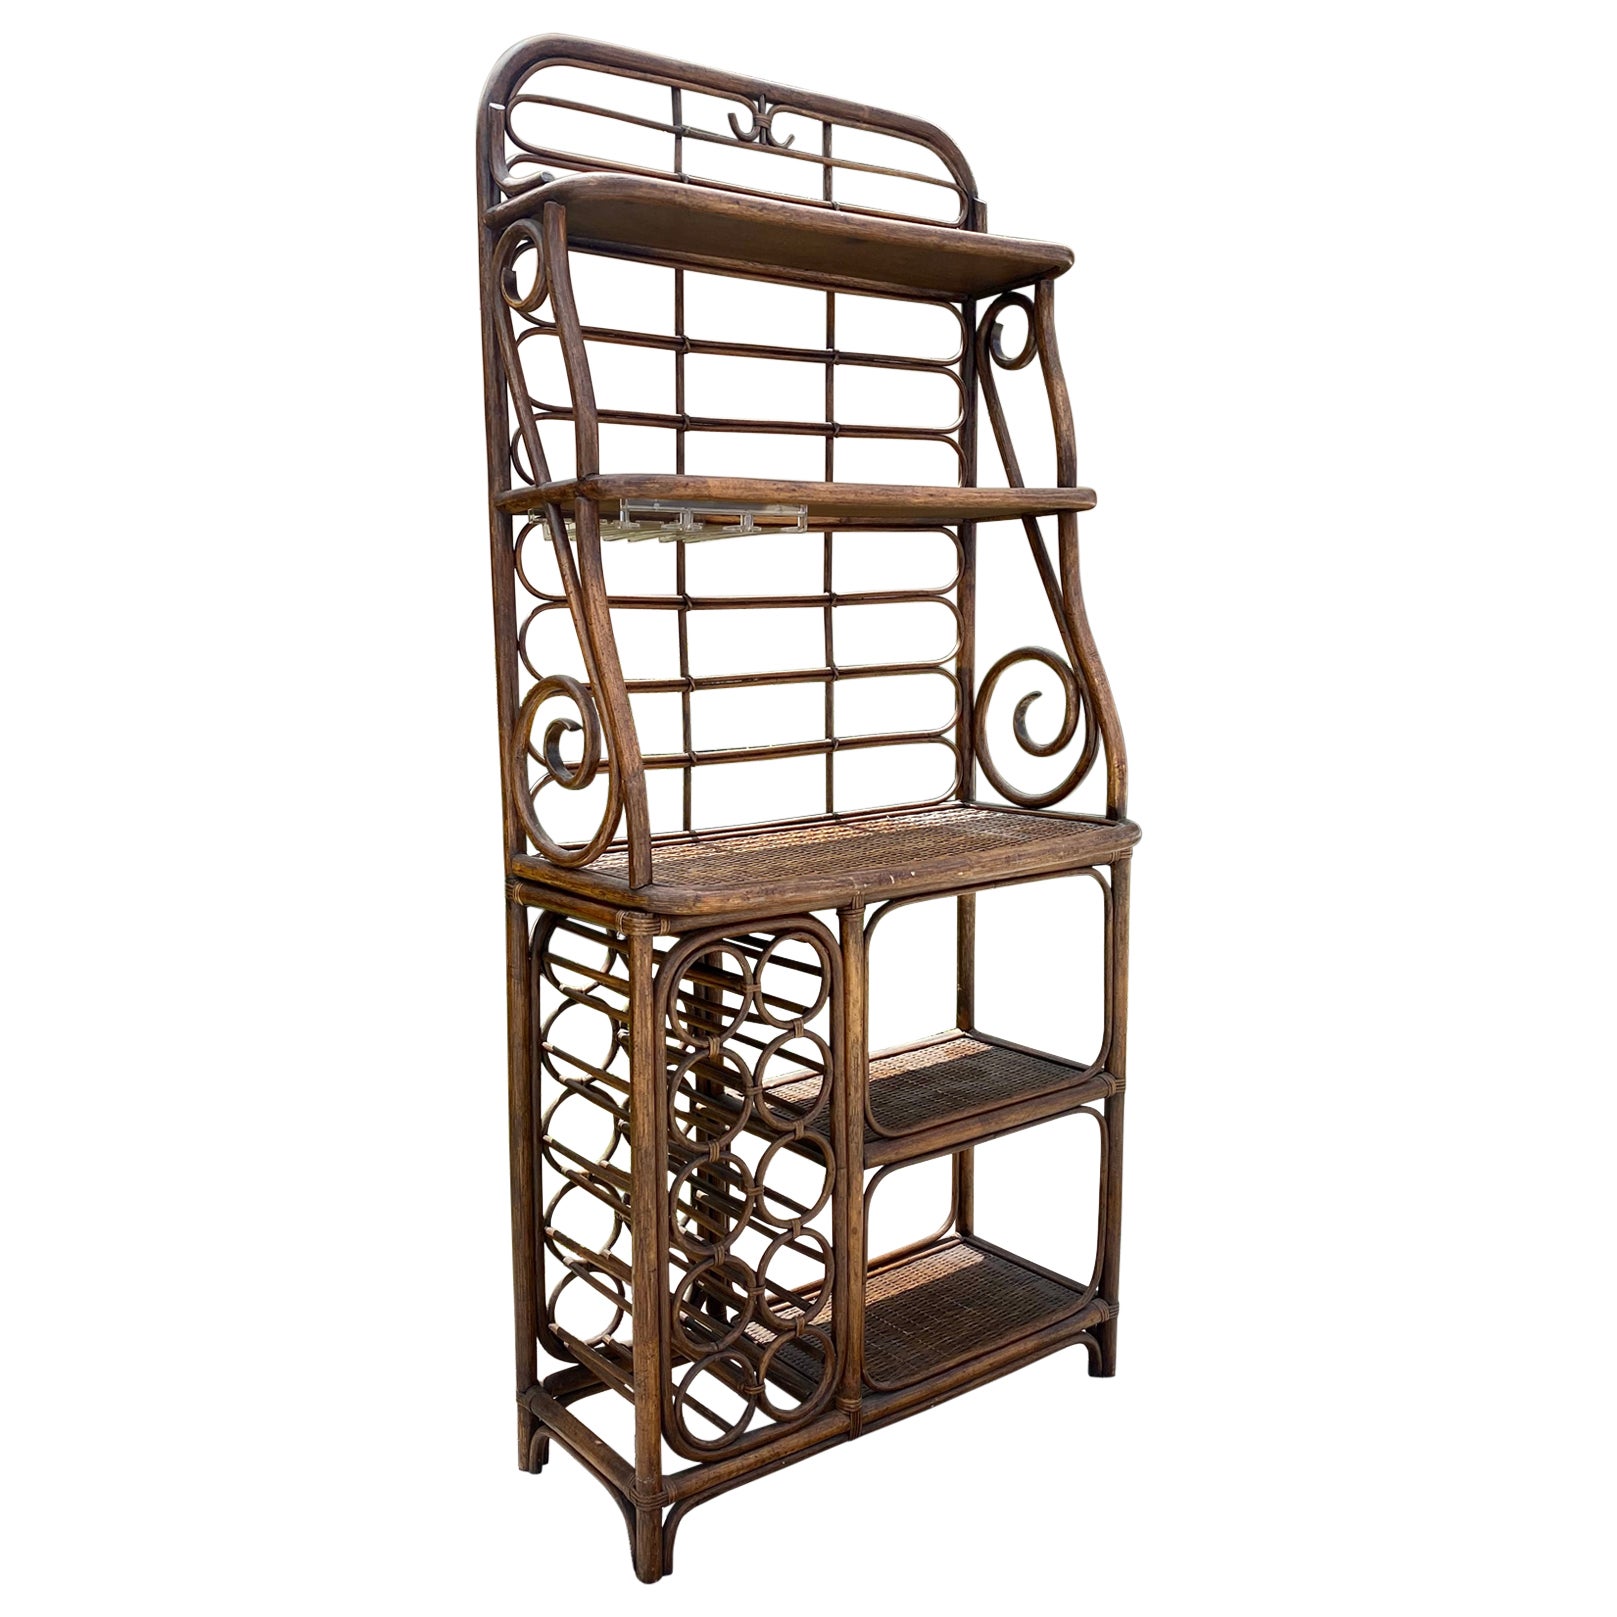 1970s Rattan and Lucite Wine Bar Bakers Rack Display Shelf For Sale